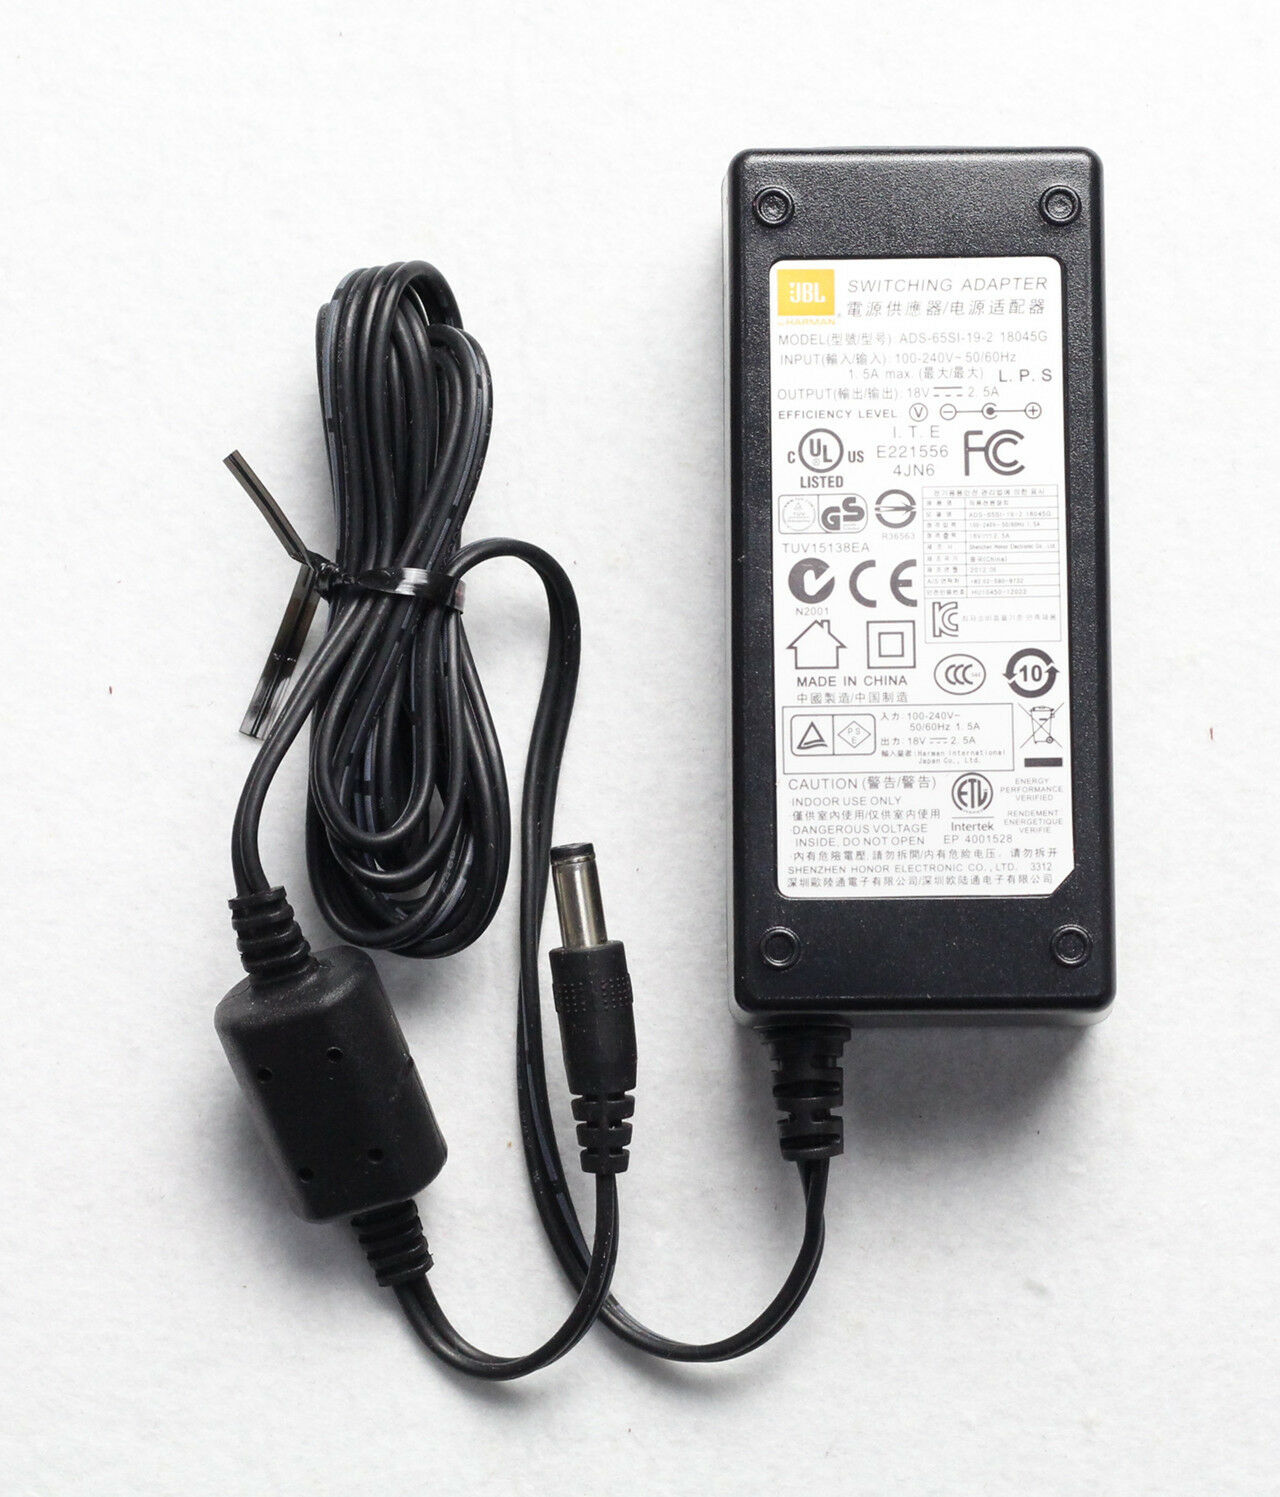 Switching Power Supply AC Adapter JBL ADS-65SI-19-2 18045G 18V-2.5A UPC: Does not apply Model: ADS-65SI-19-2